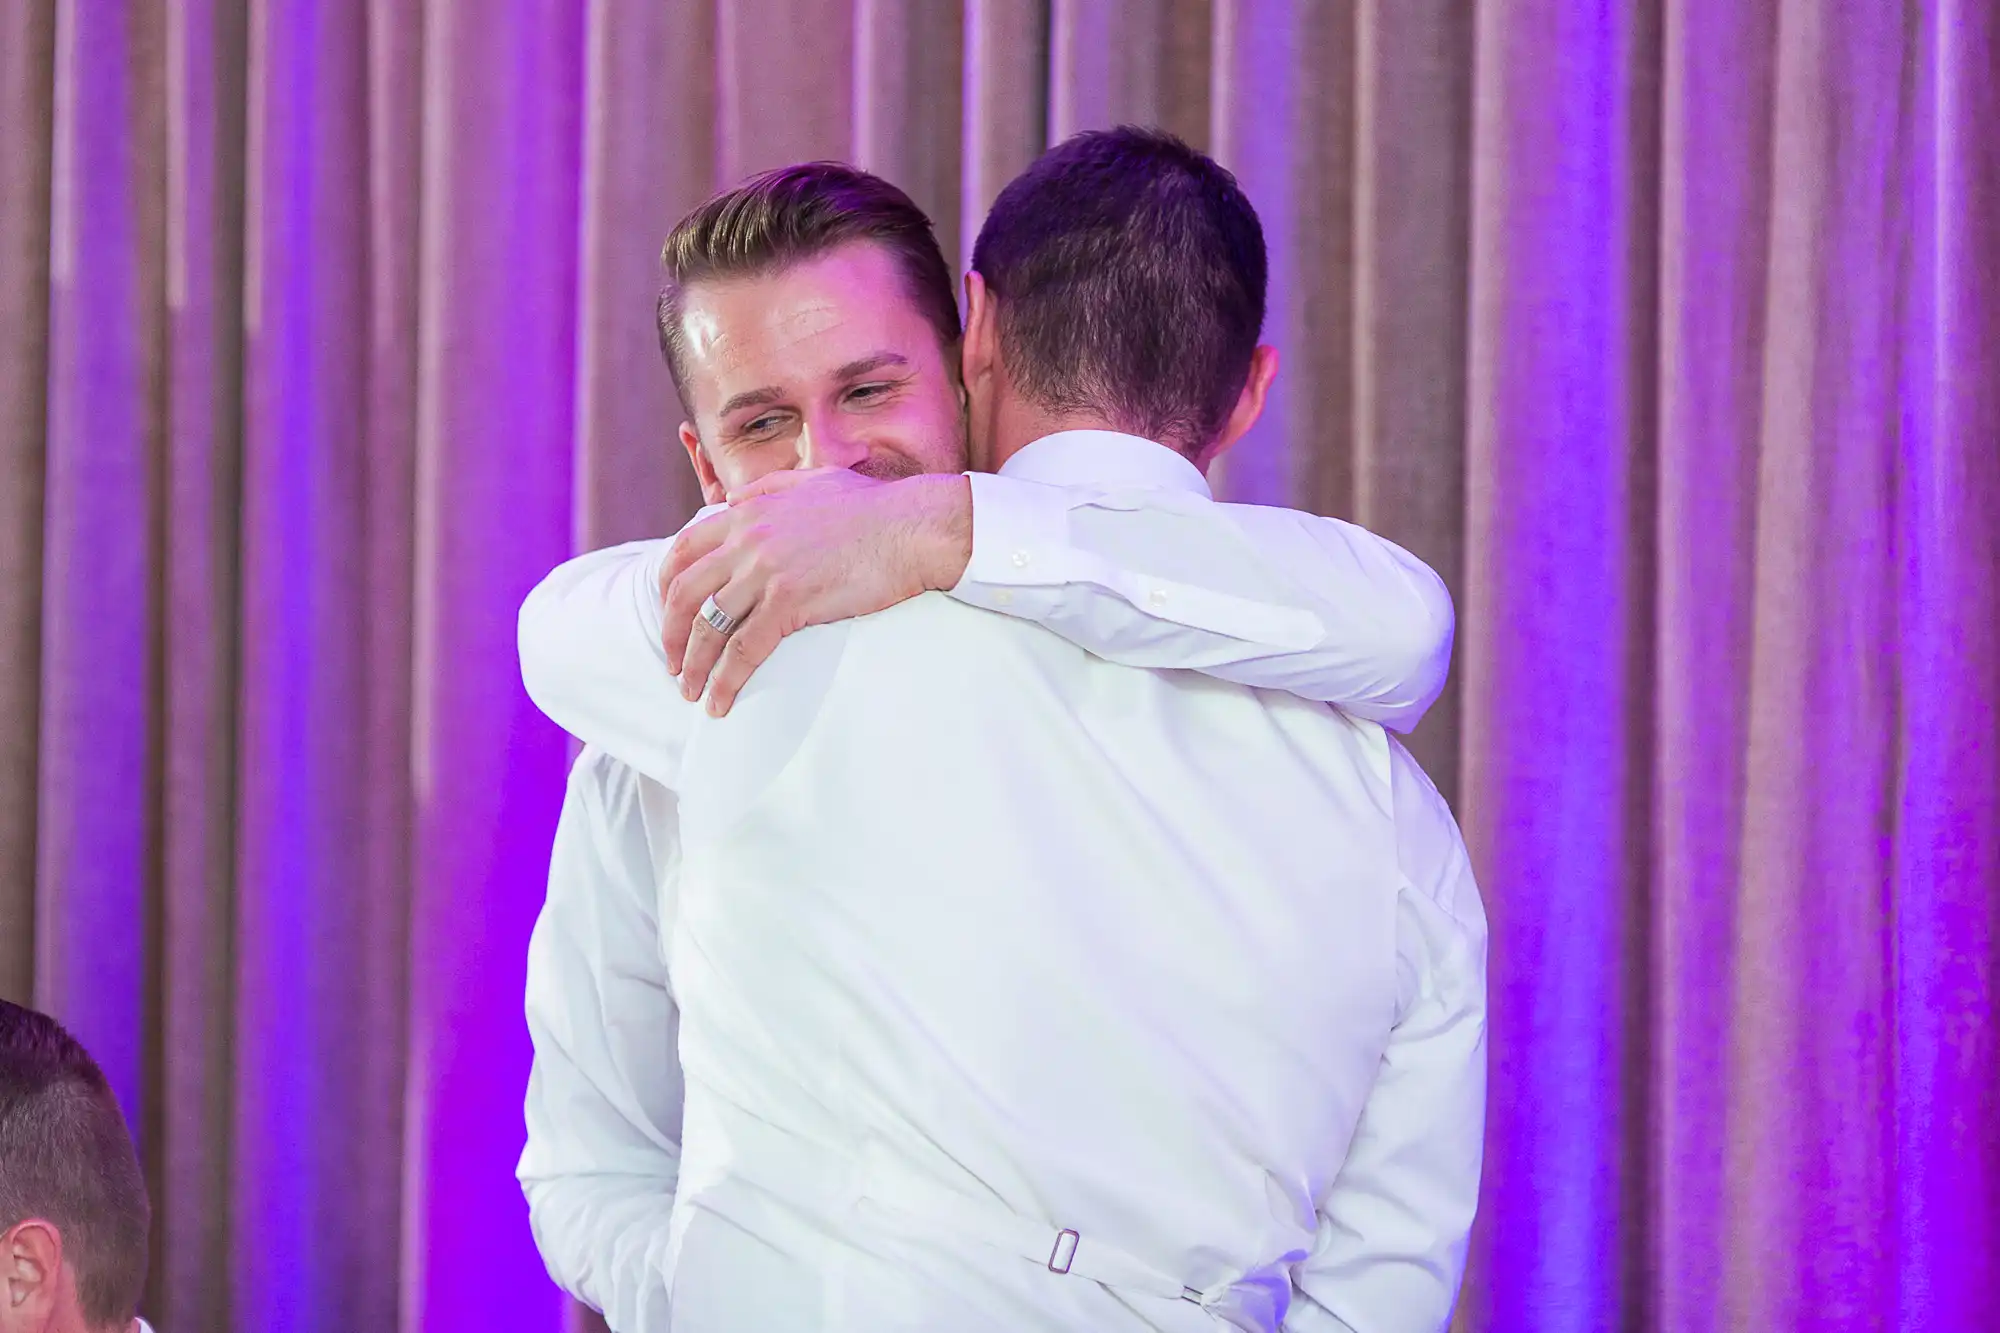 Two men in formal wear sharing a heartfelt embrace at an event with a purple-lit background.